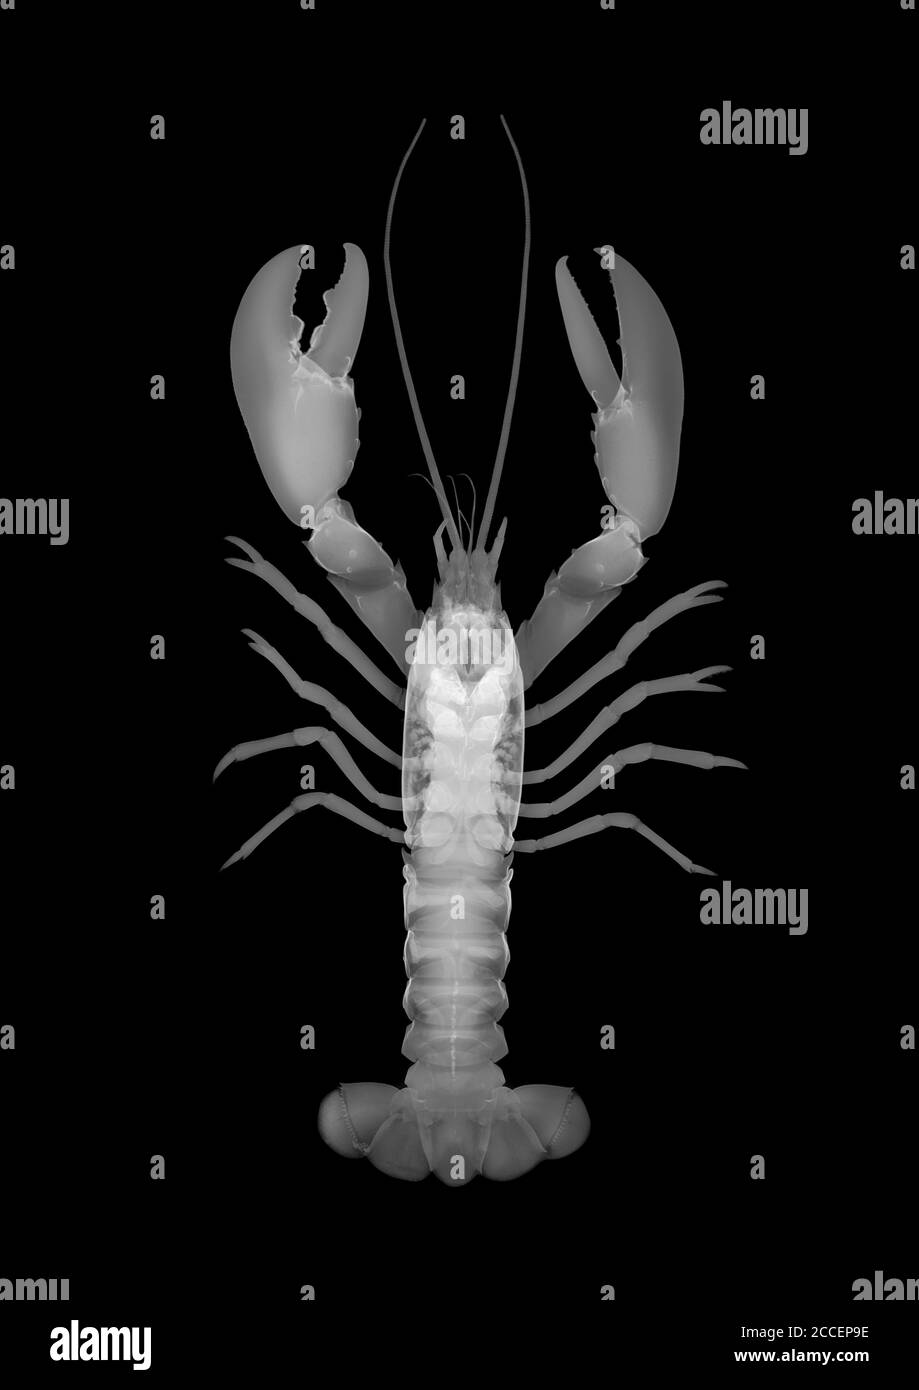 Lobster Black and White Stock Photos & Images - Alamy